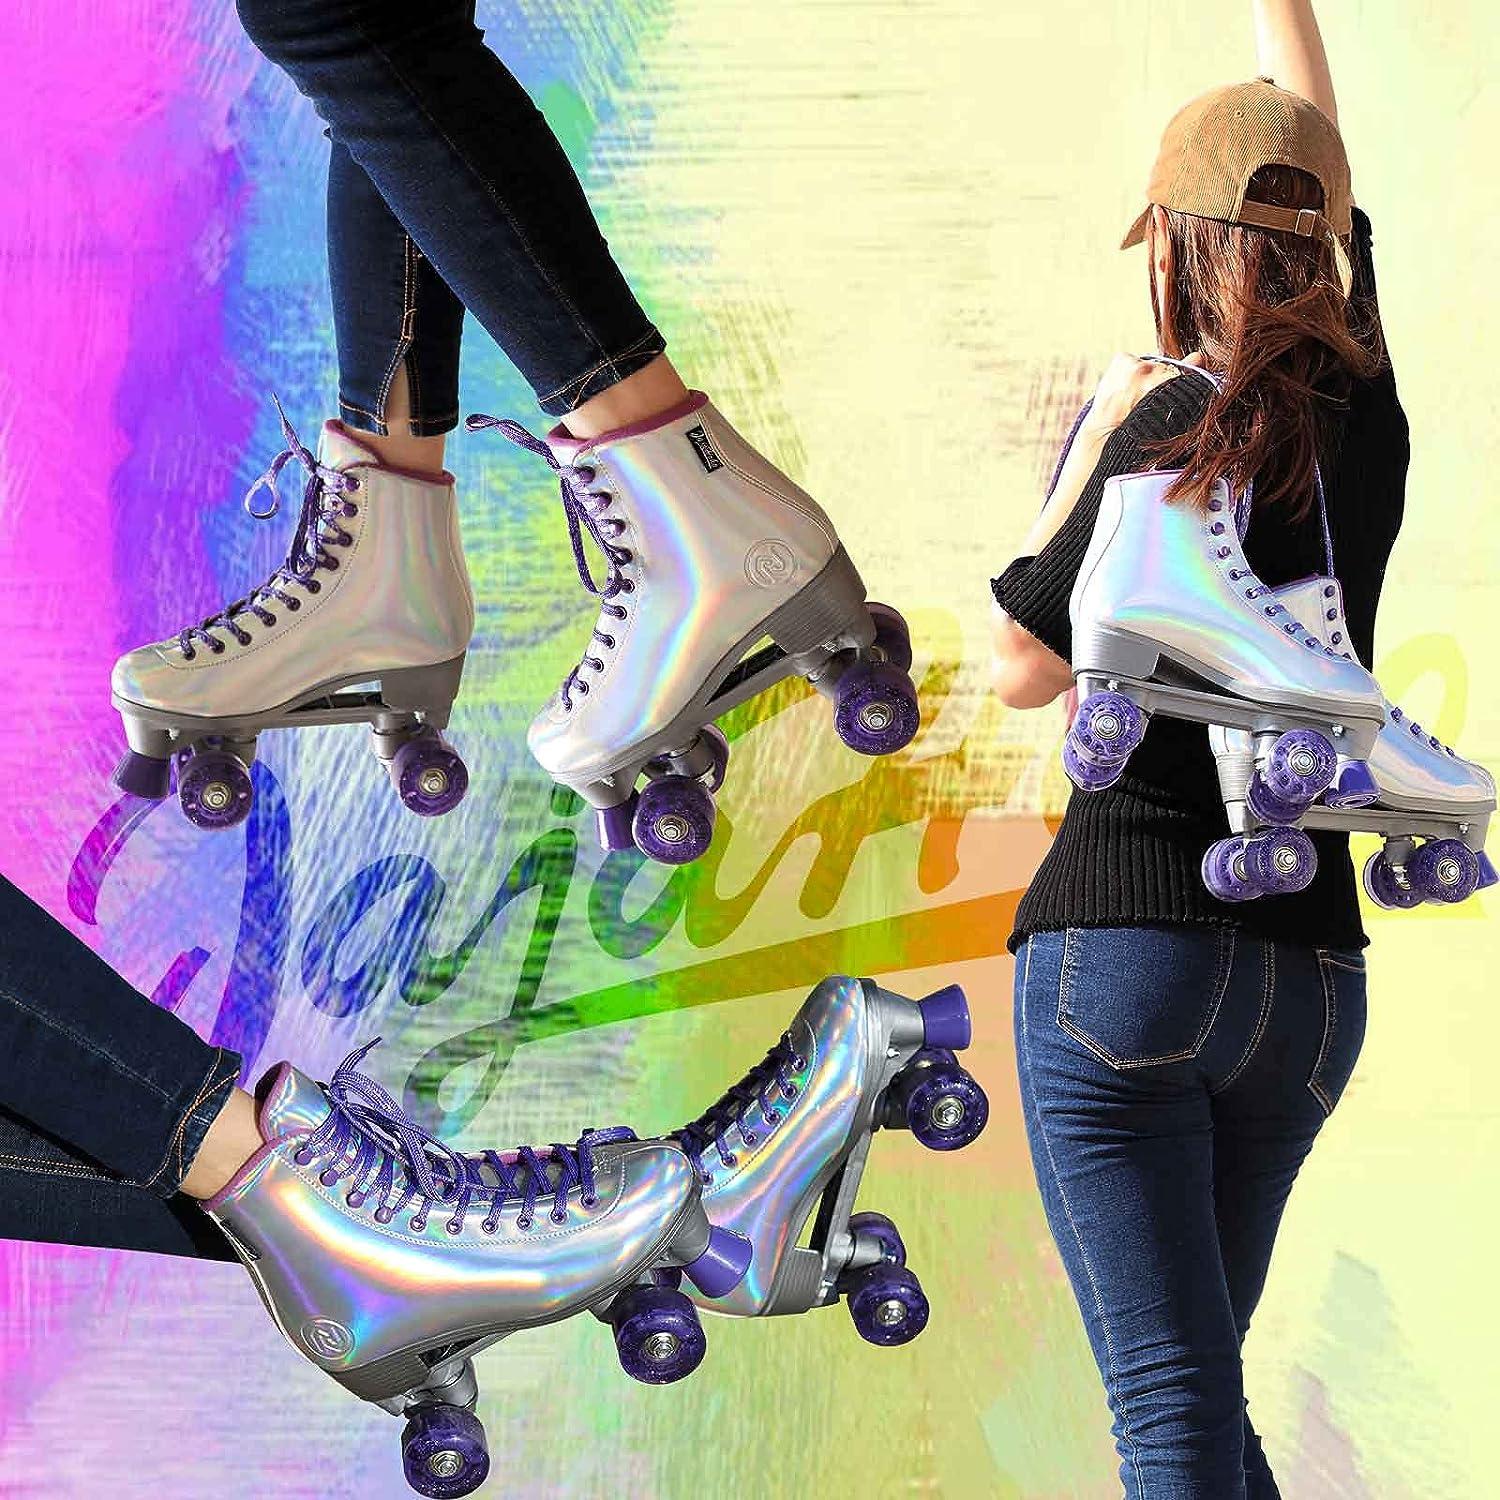 JajaHoho Roller Skates for Women, Holographic High Top PU Leather